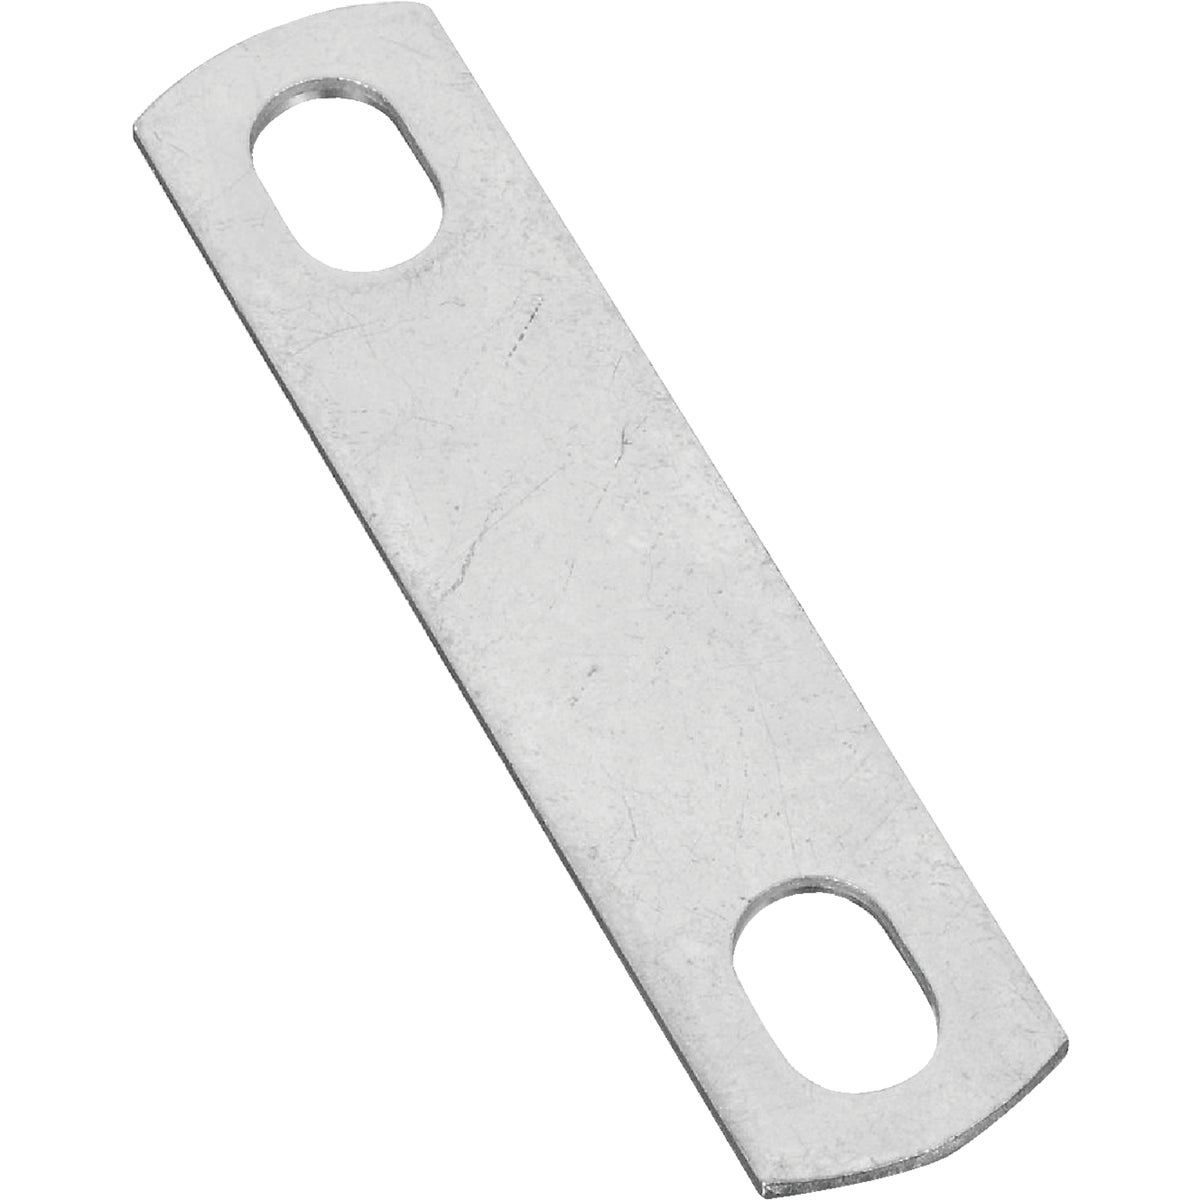 Item 215058, U bolt plate for use with model No. 2192 square U bolts.